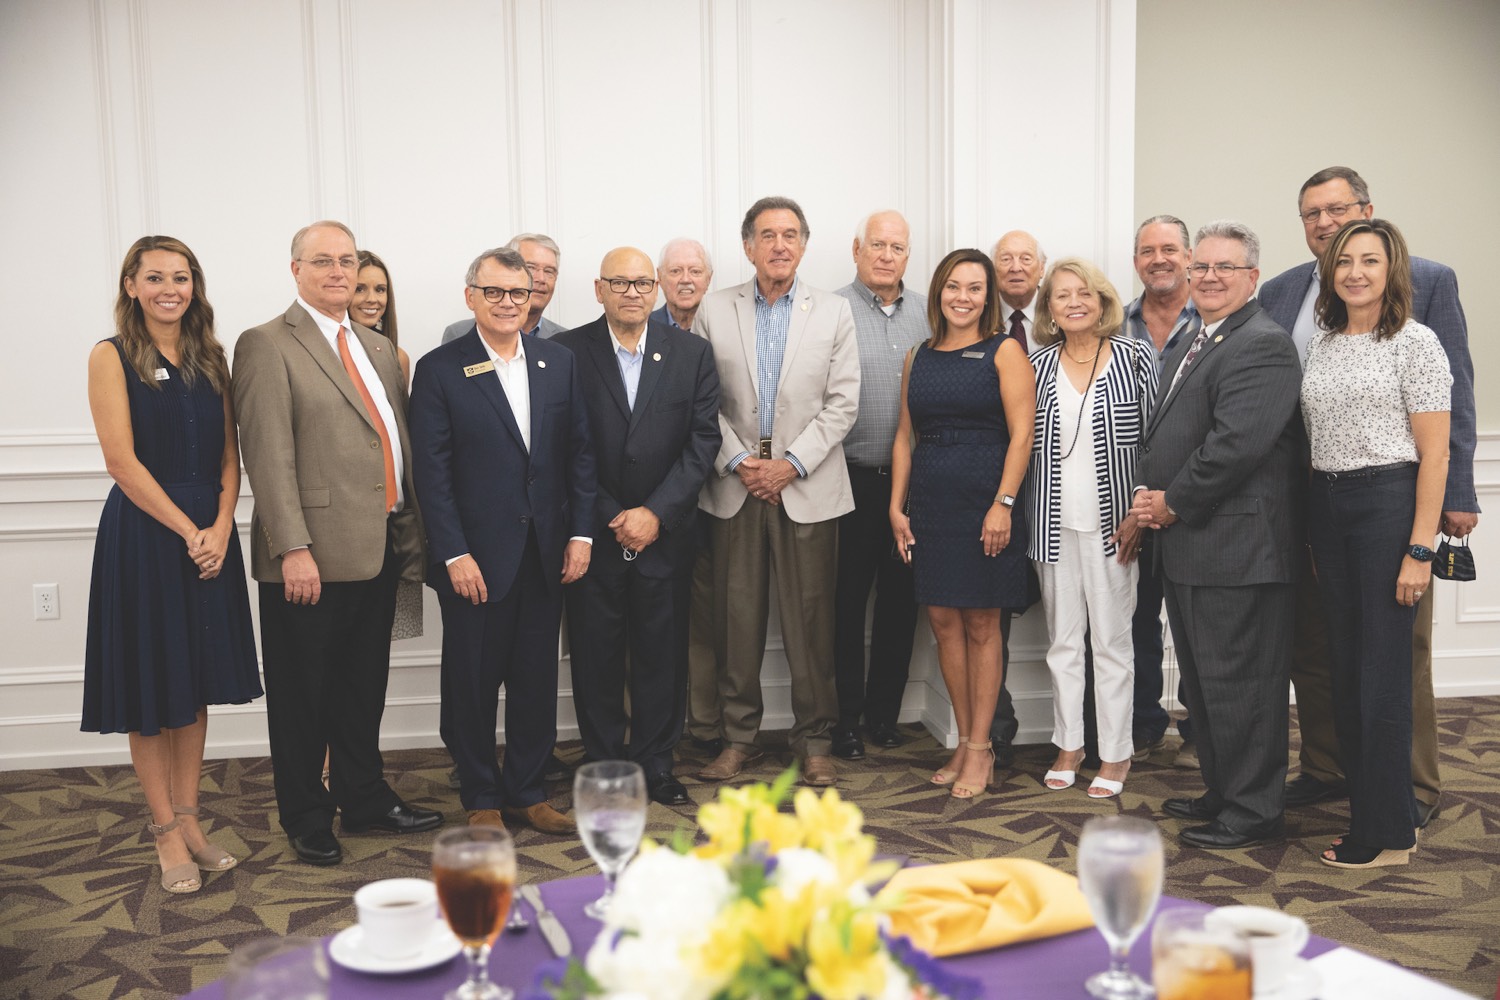 Friends, colleagues and civic leaders gathered at Ouachita to celebrate Robert S. Moore Jr. when he received Ouachita's Distinguished Alumni Award during a luncheon held in his honor.